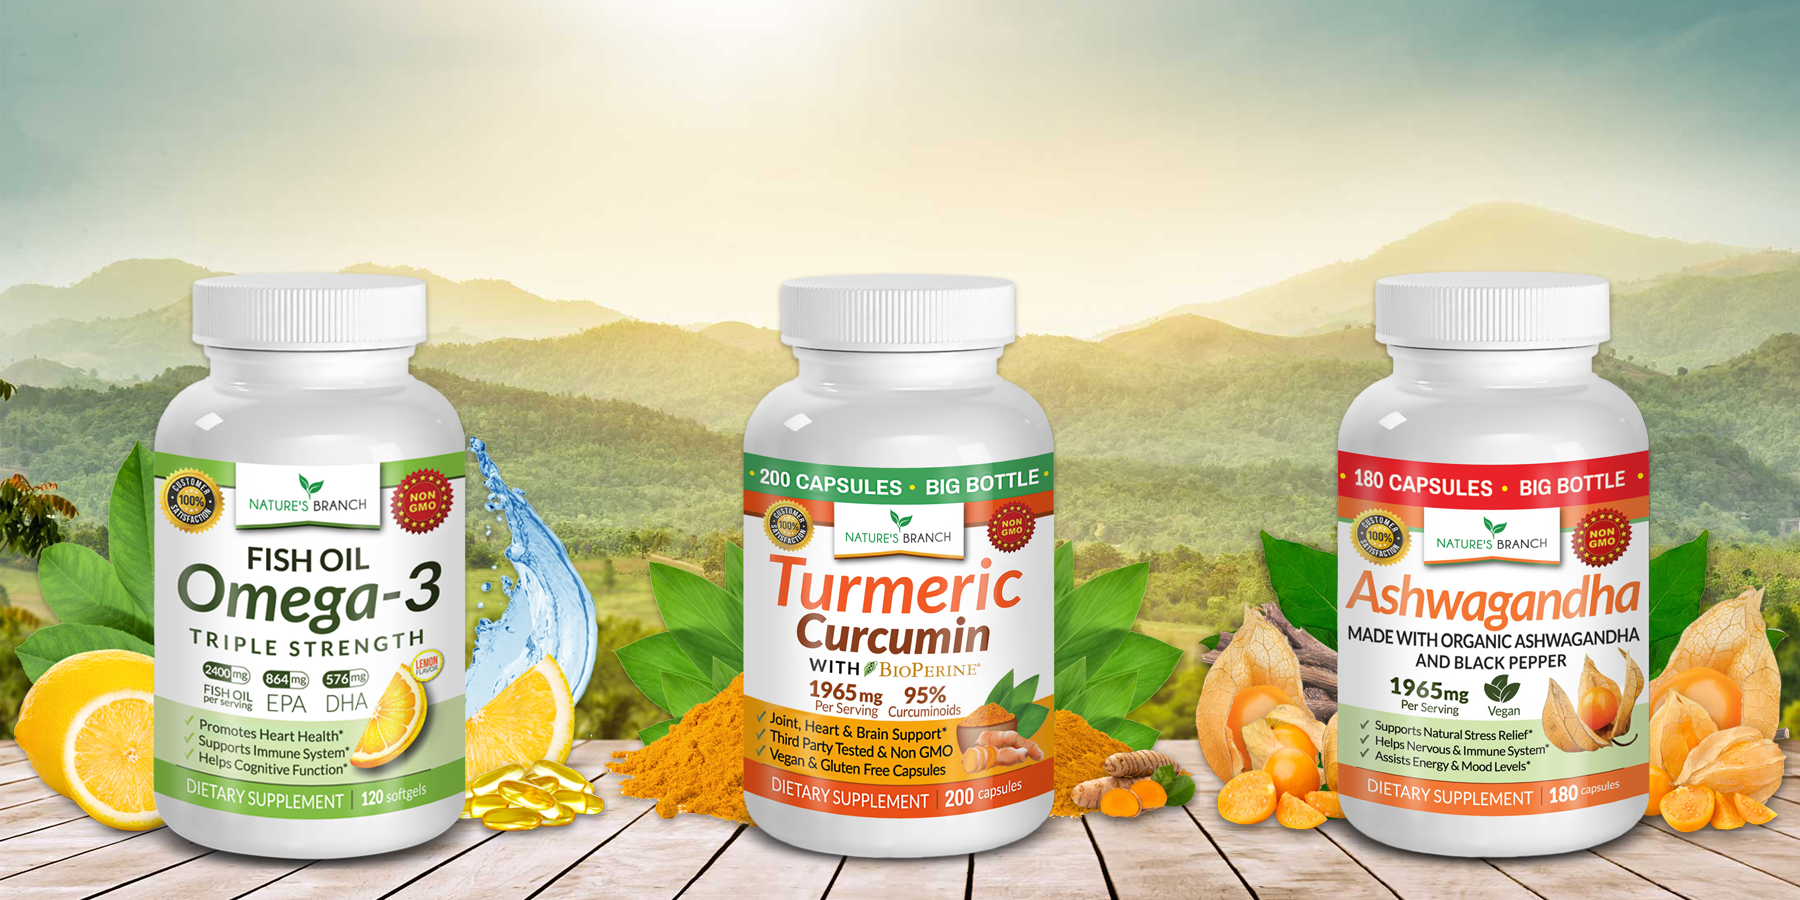 Nature's Branch Omega 3 Fish Oil Turmeric Curcumin and Ashwagandha supplement bottles on a table